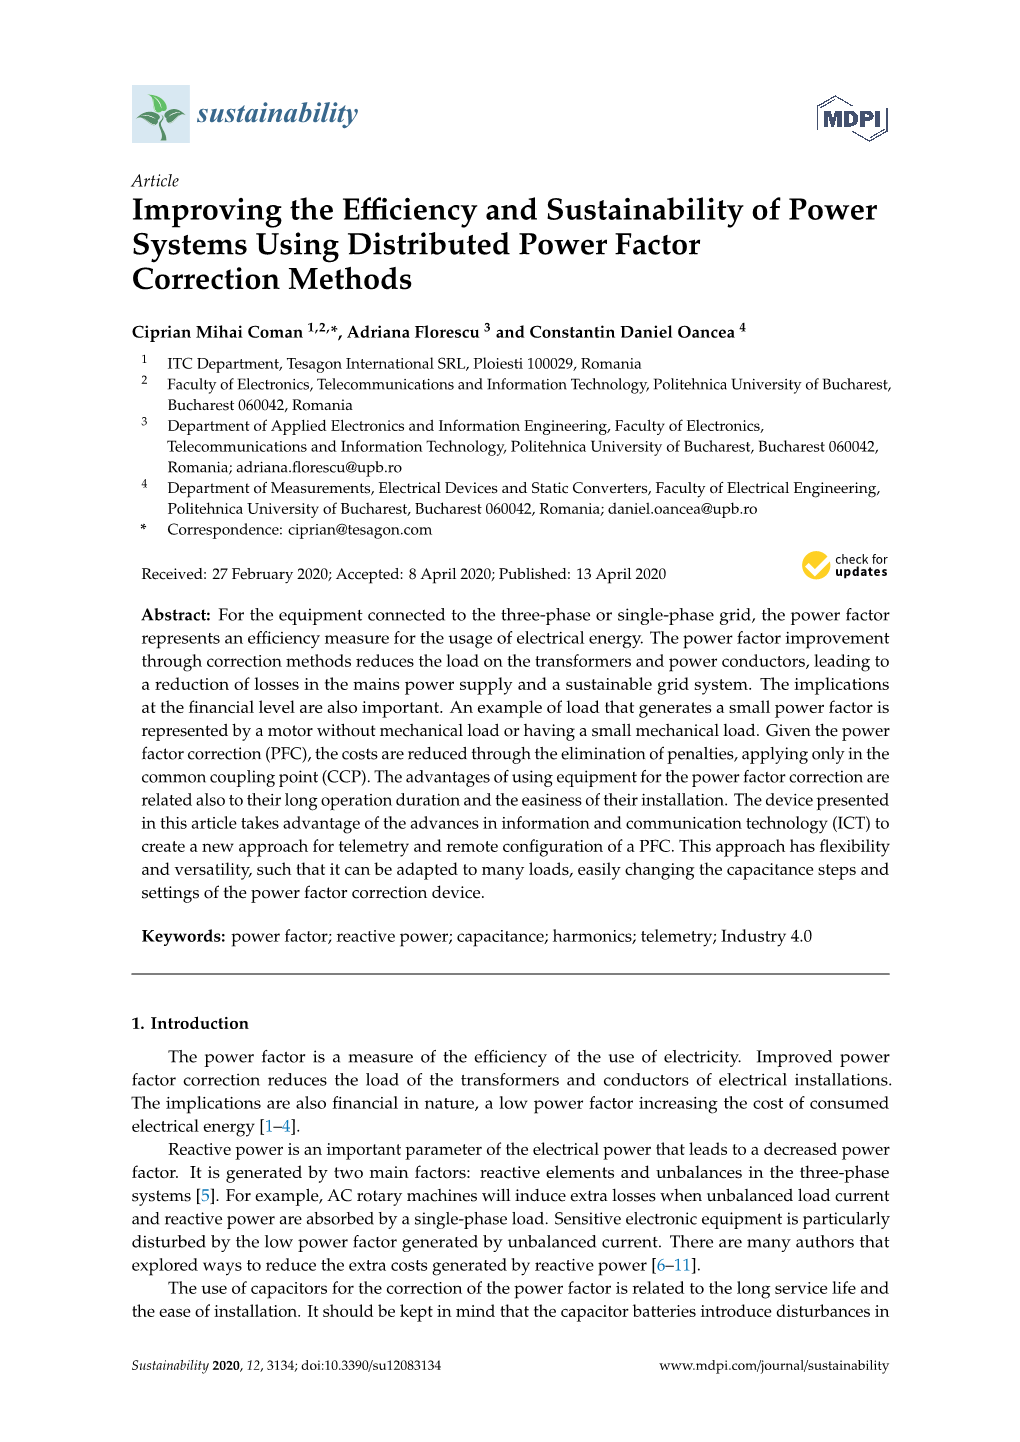 Improving the Efficiency and Sustainability of Power Systems Using Distributed Power Factor Correction Methods